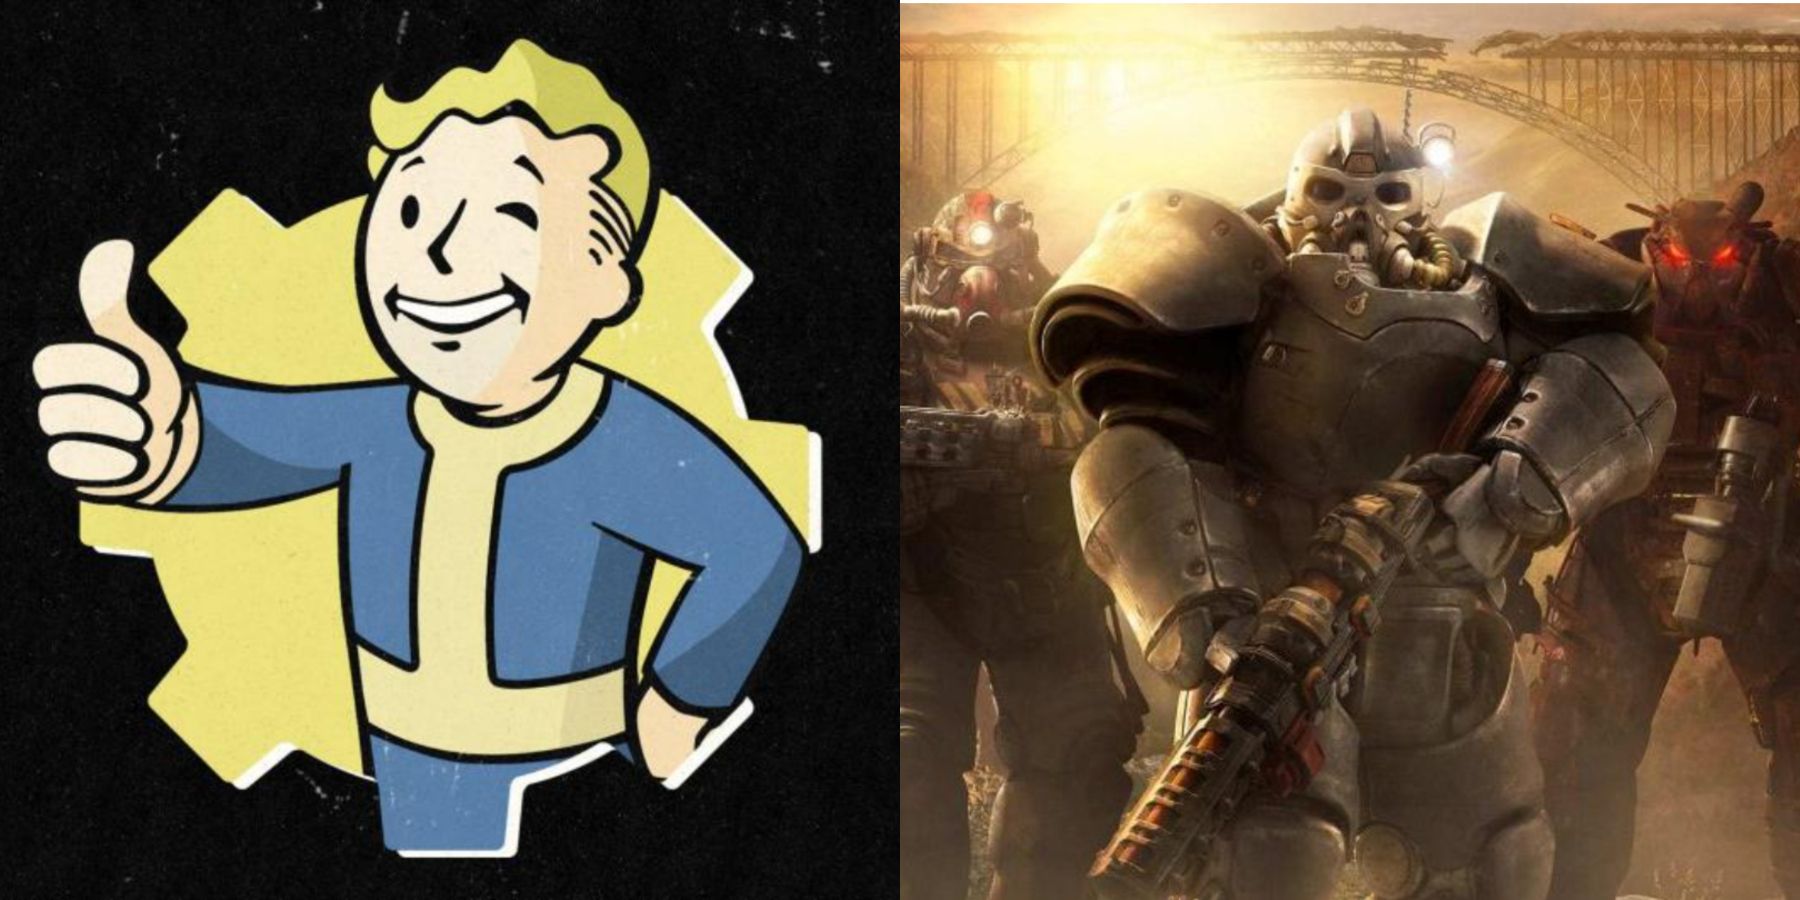 Split image of Pip-boy mascot and power armor.